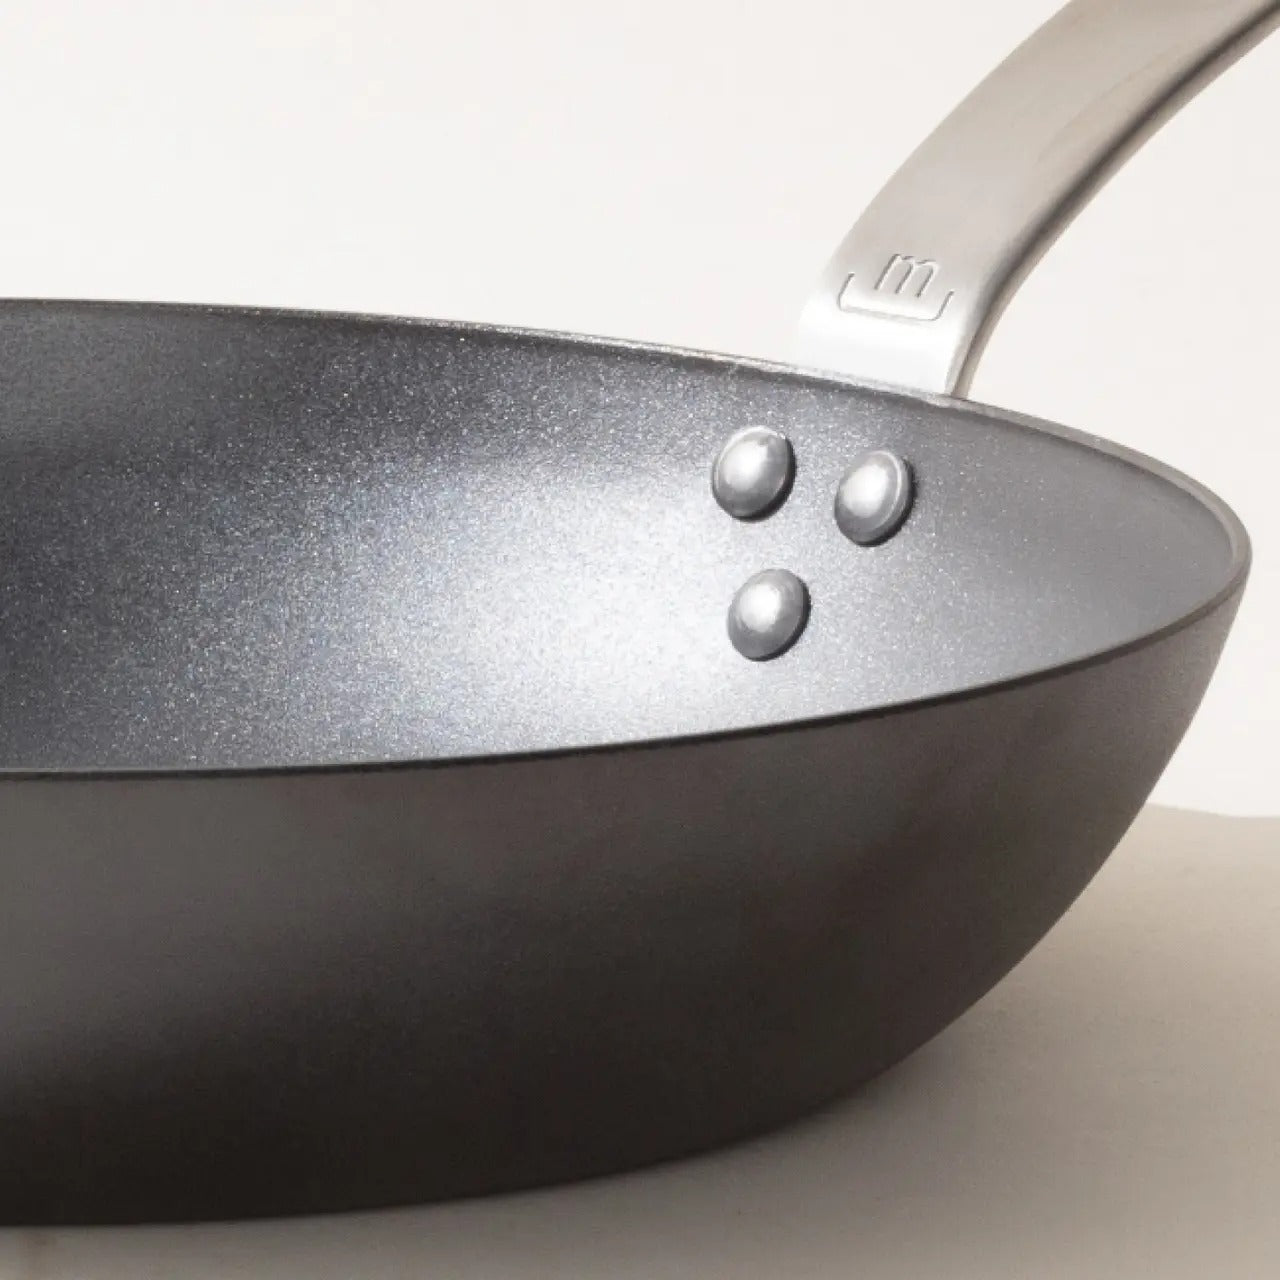 MADE IN Blue Carbon Steel Fry Pans - 10", 12"